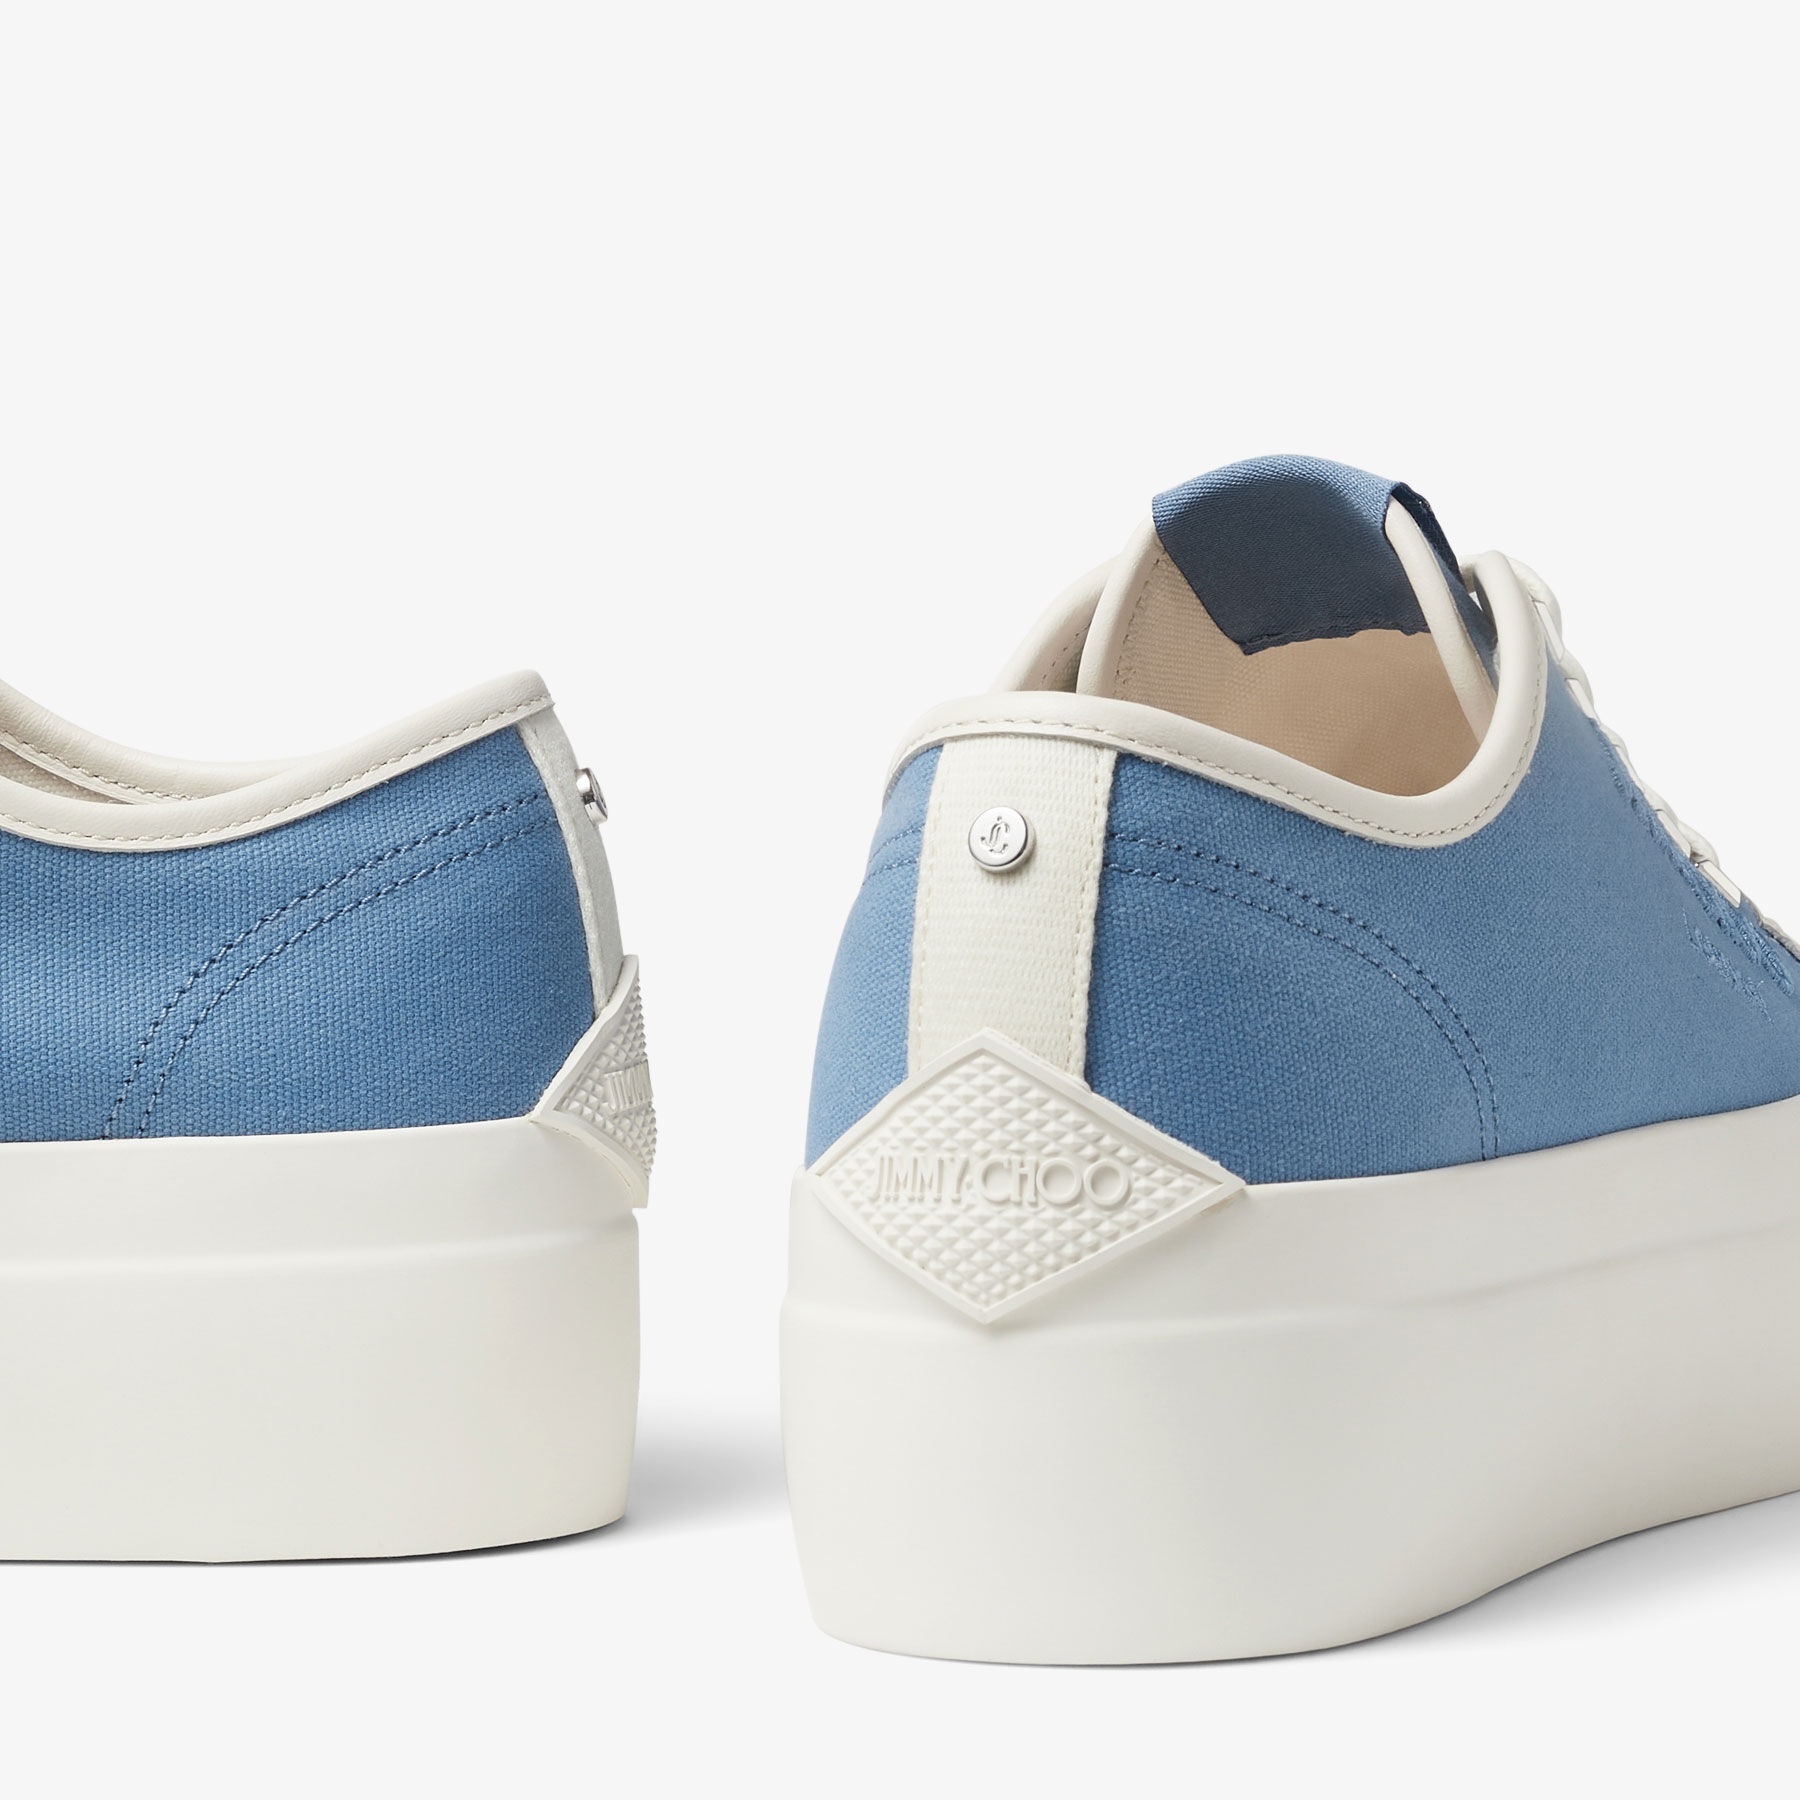 Palma Maxi/F
Denim and Latte Canvas Platform Trainers with Embroidered Logo - 3